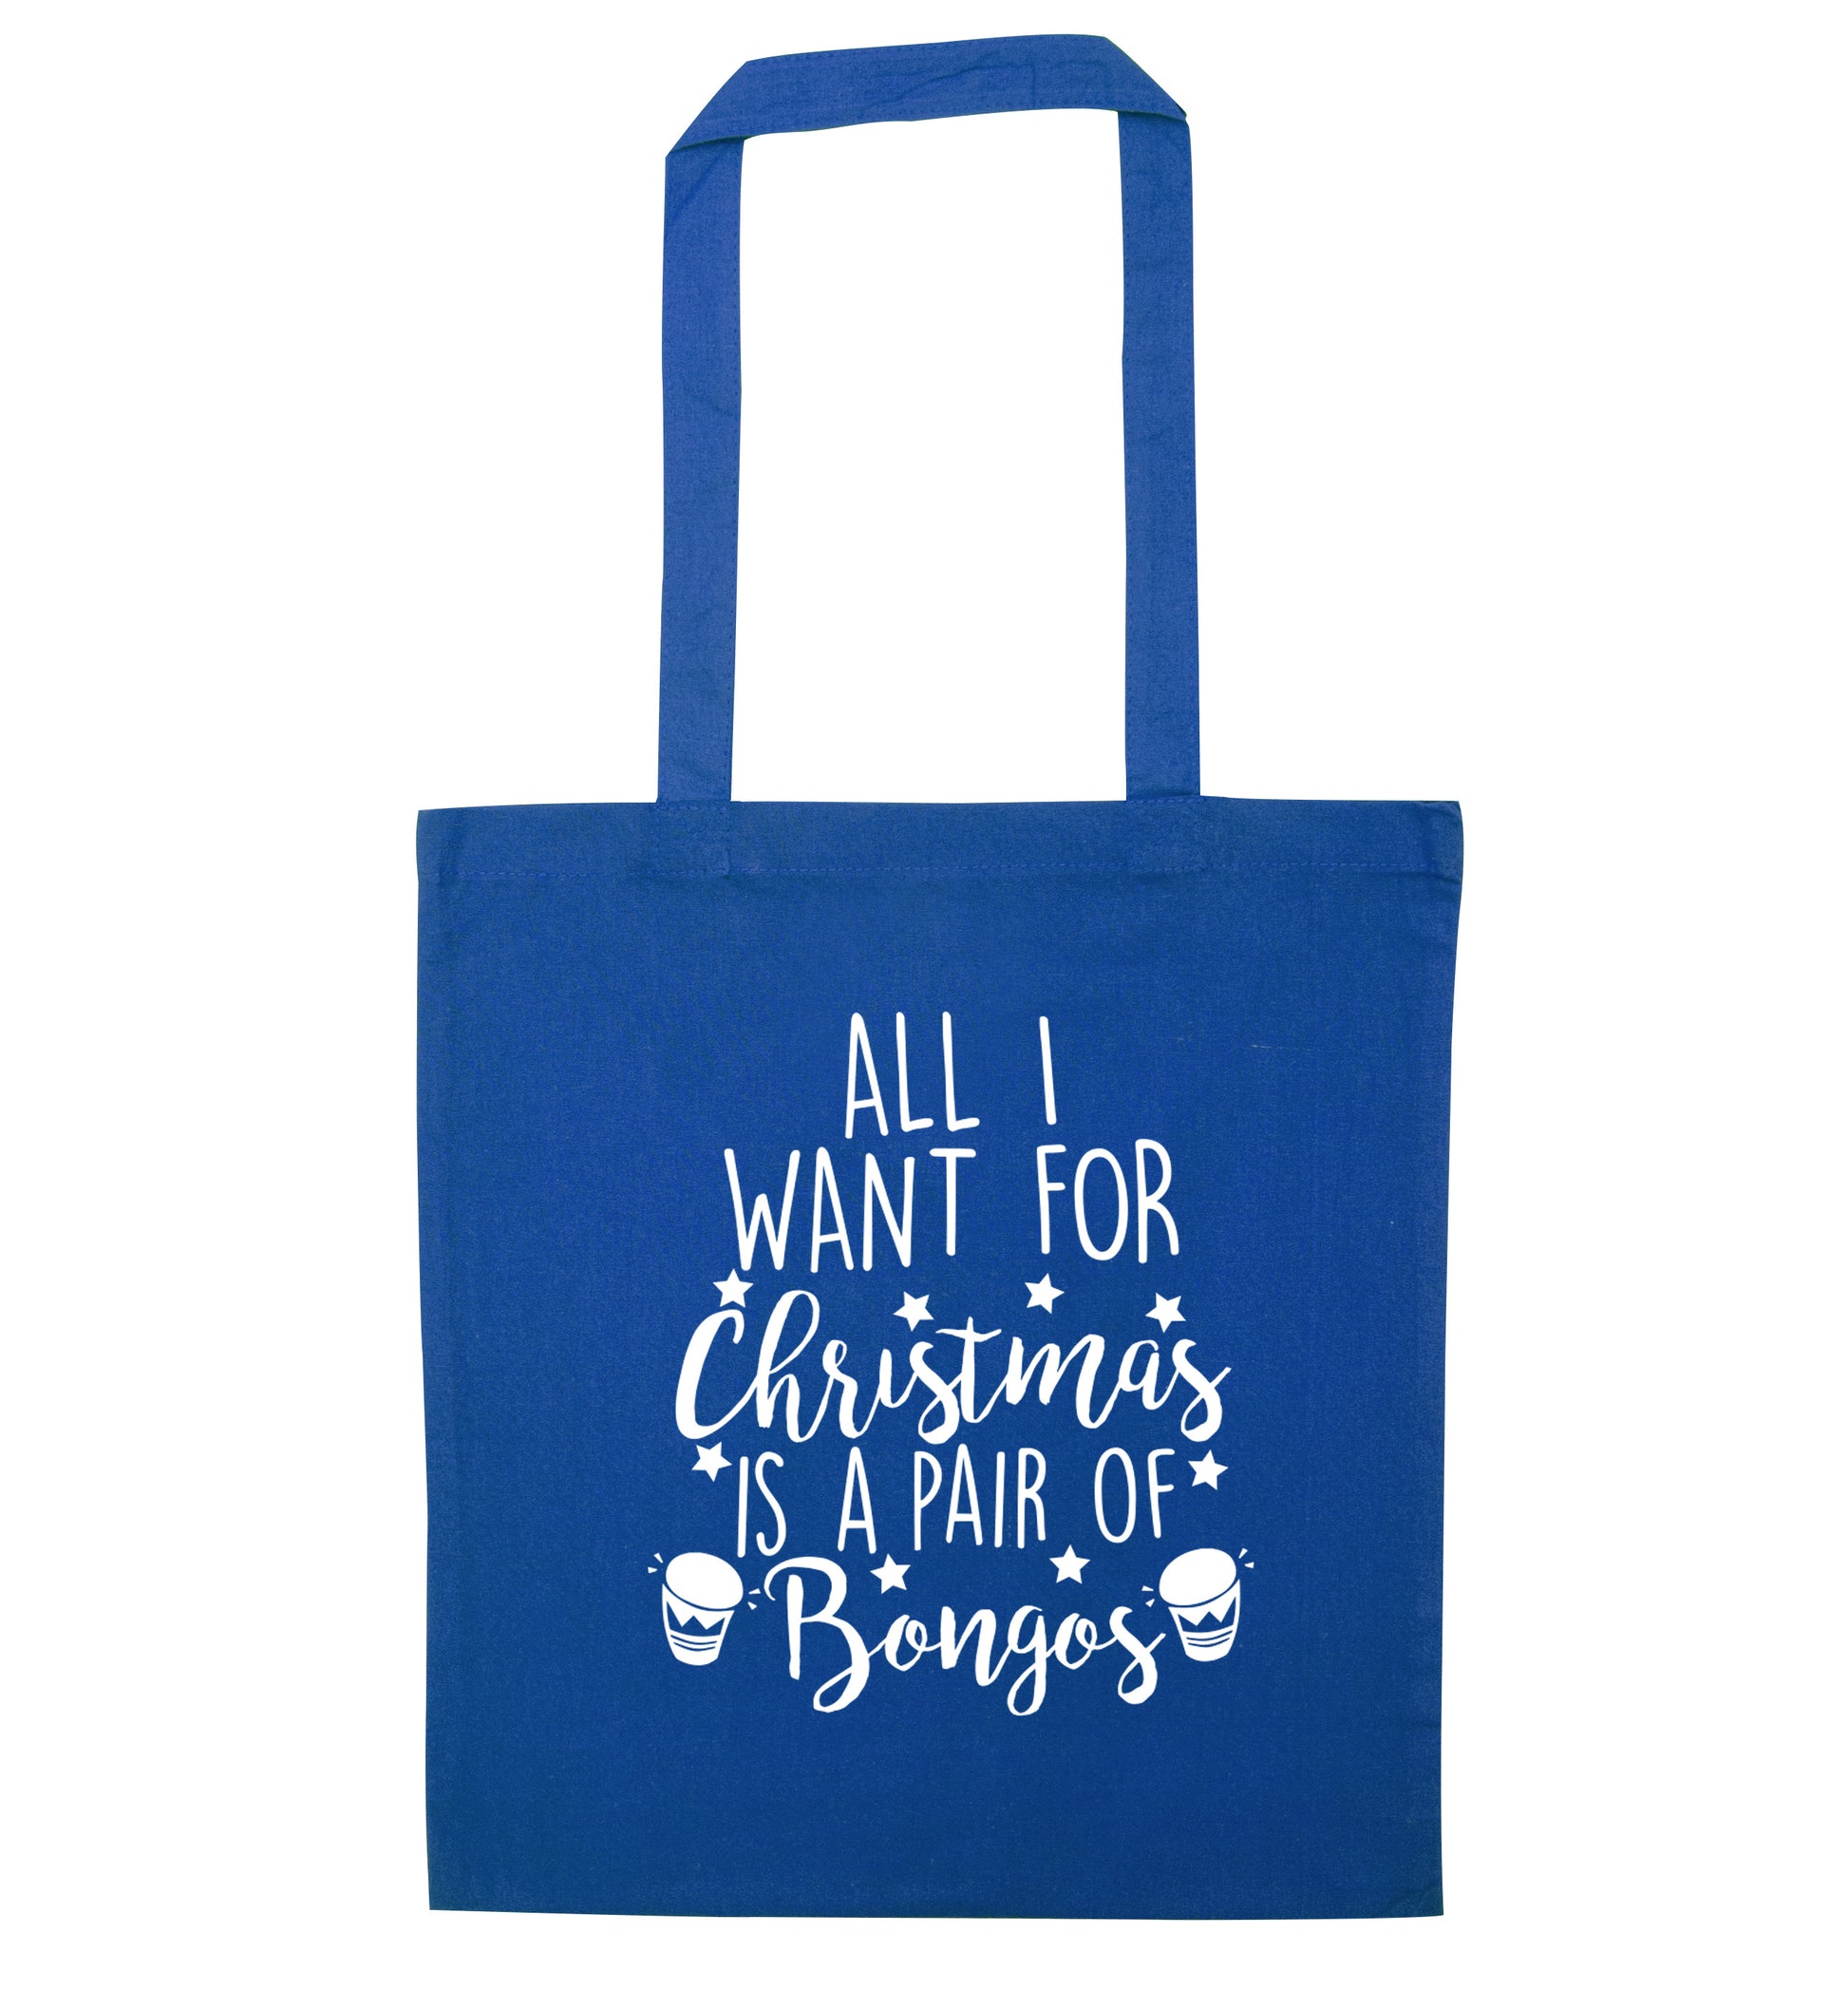 All I want for Christmas is a pair of bongos! blue tote bag